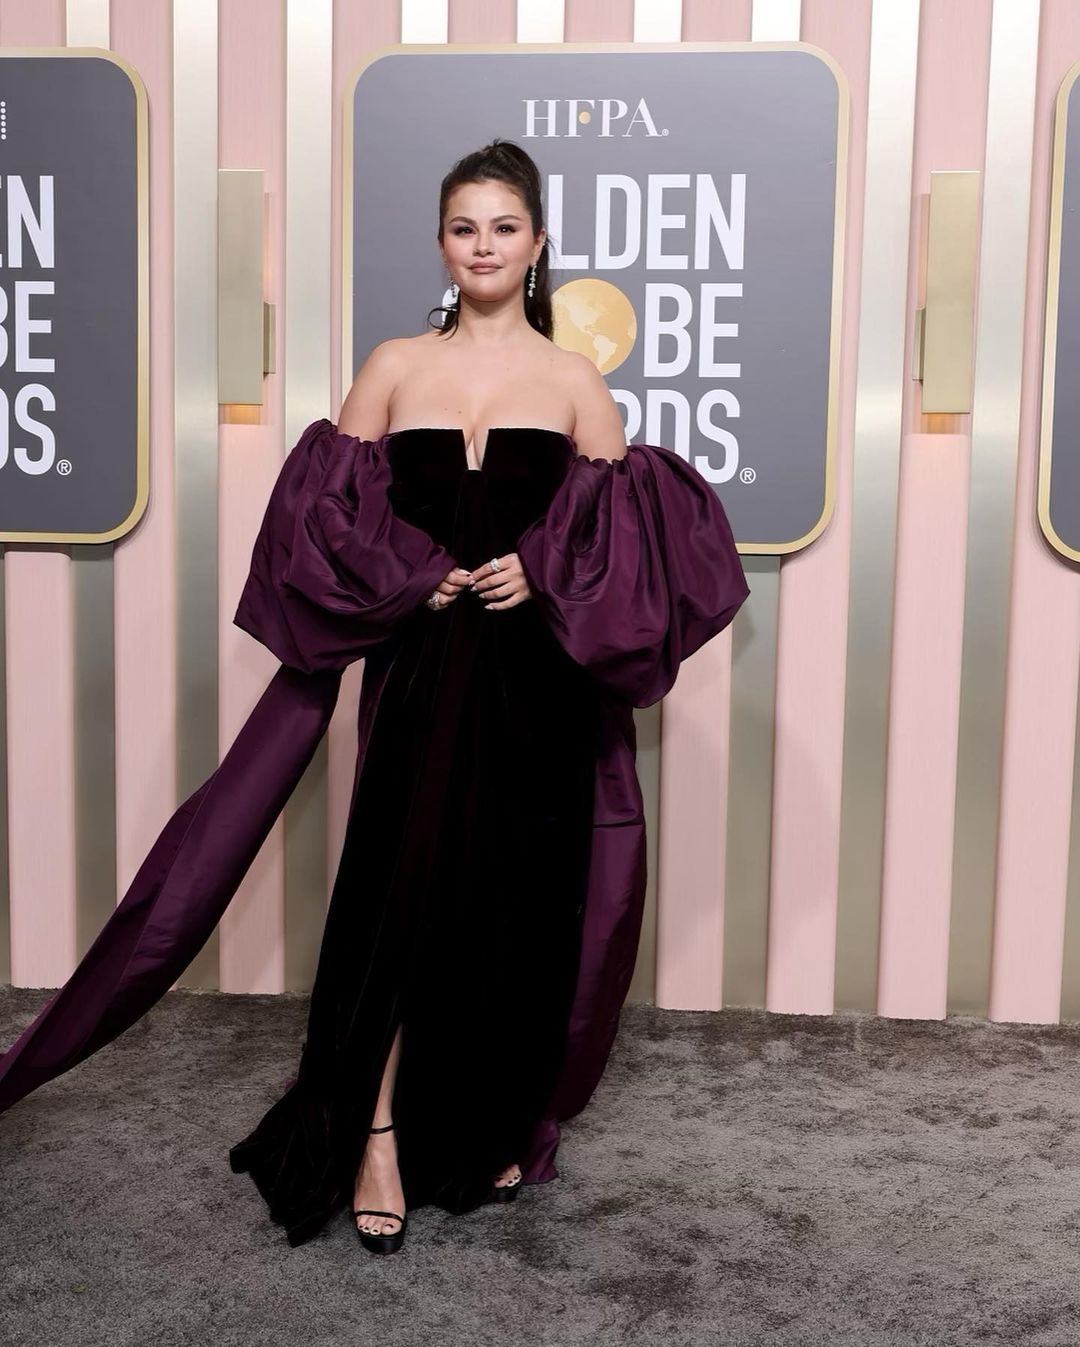 MEGA’s Top 10 Looks From the Golden Globes